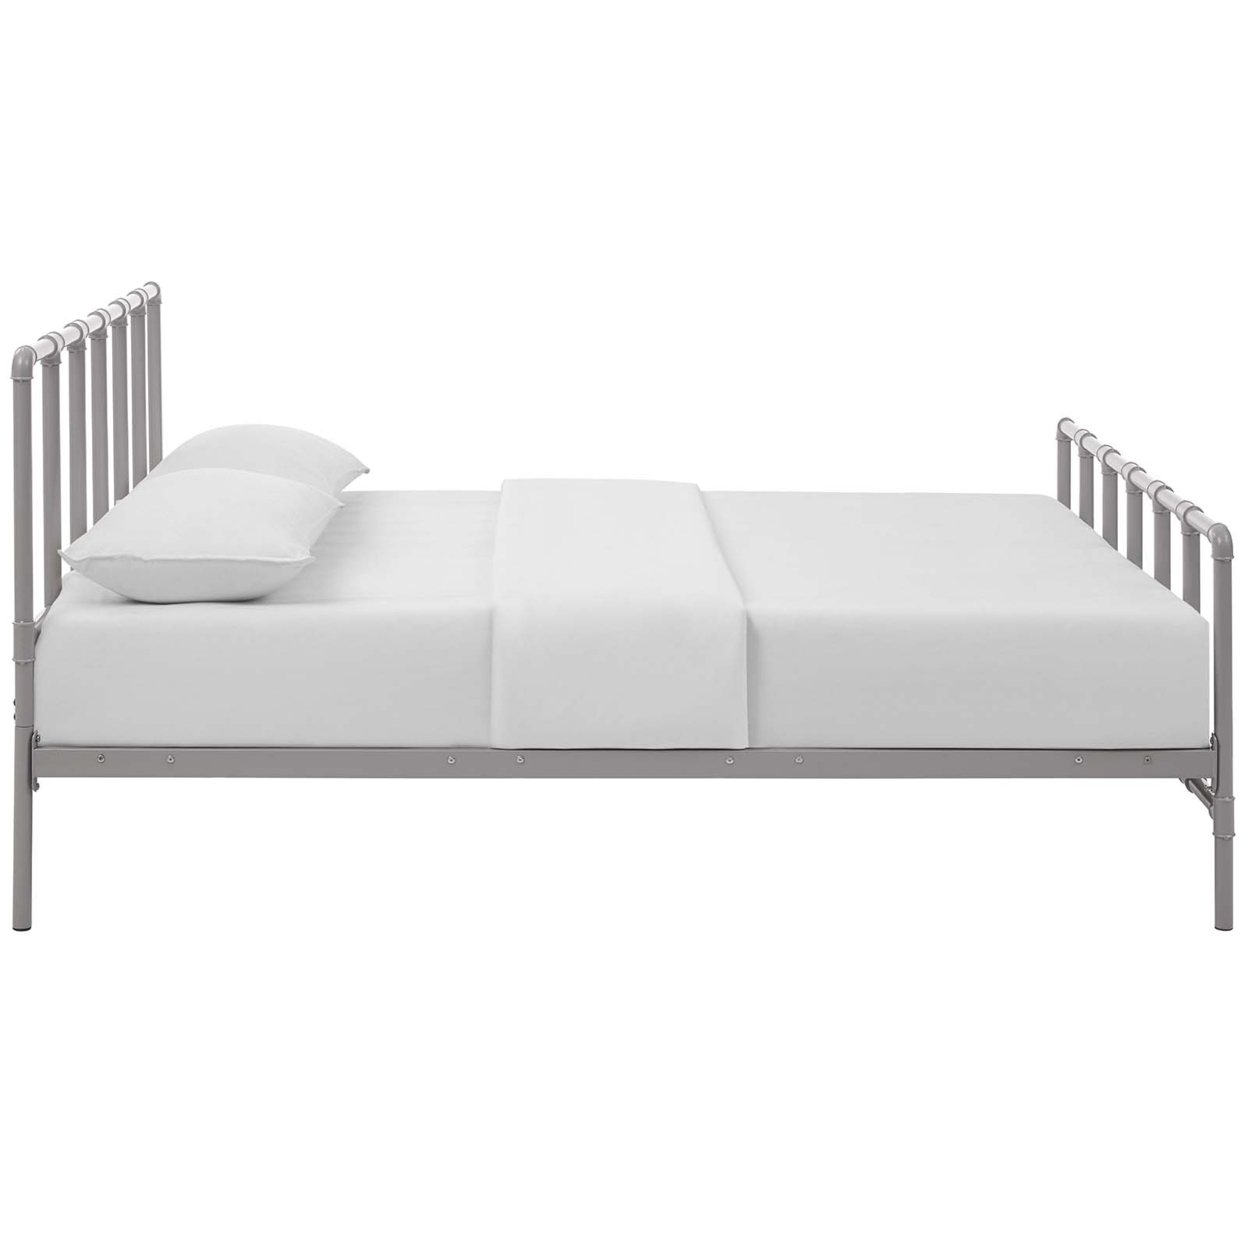 Dower Queen Stainless Steel Bed, Gray